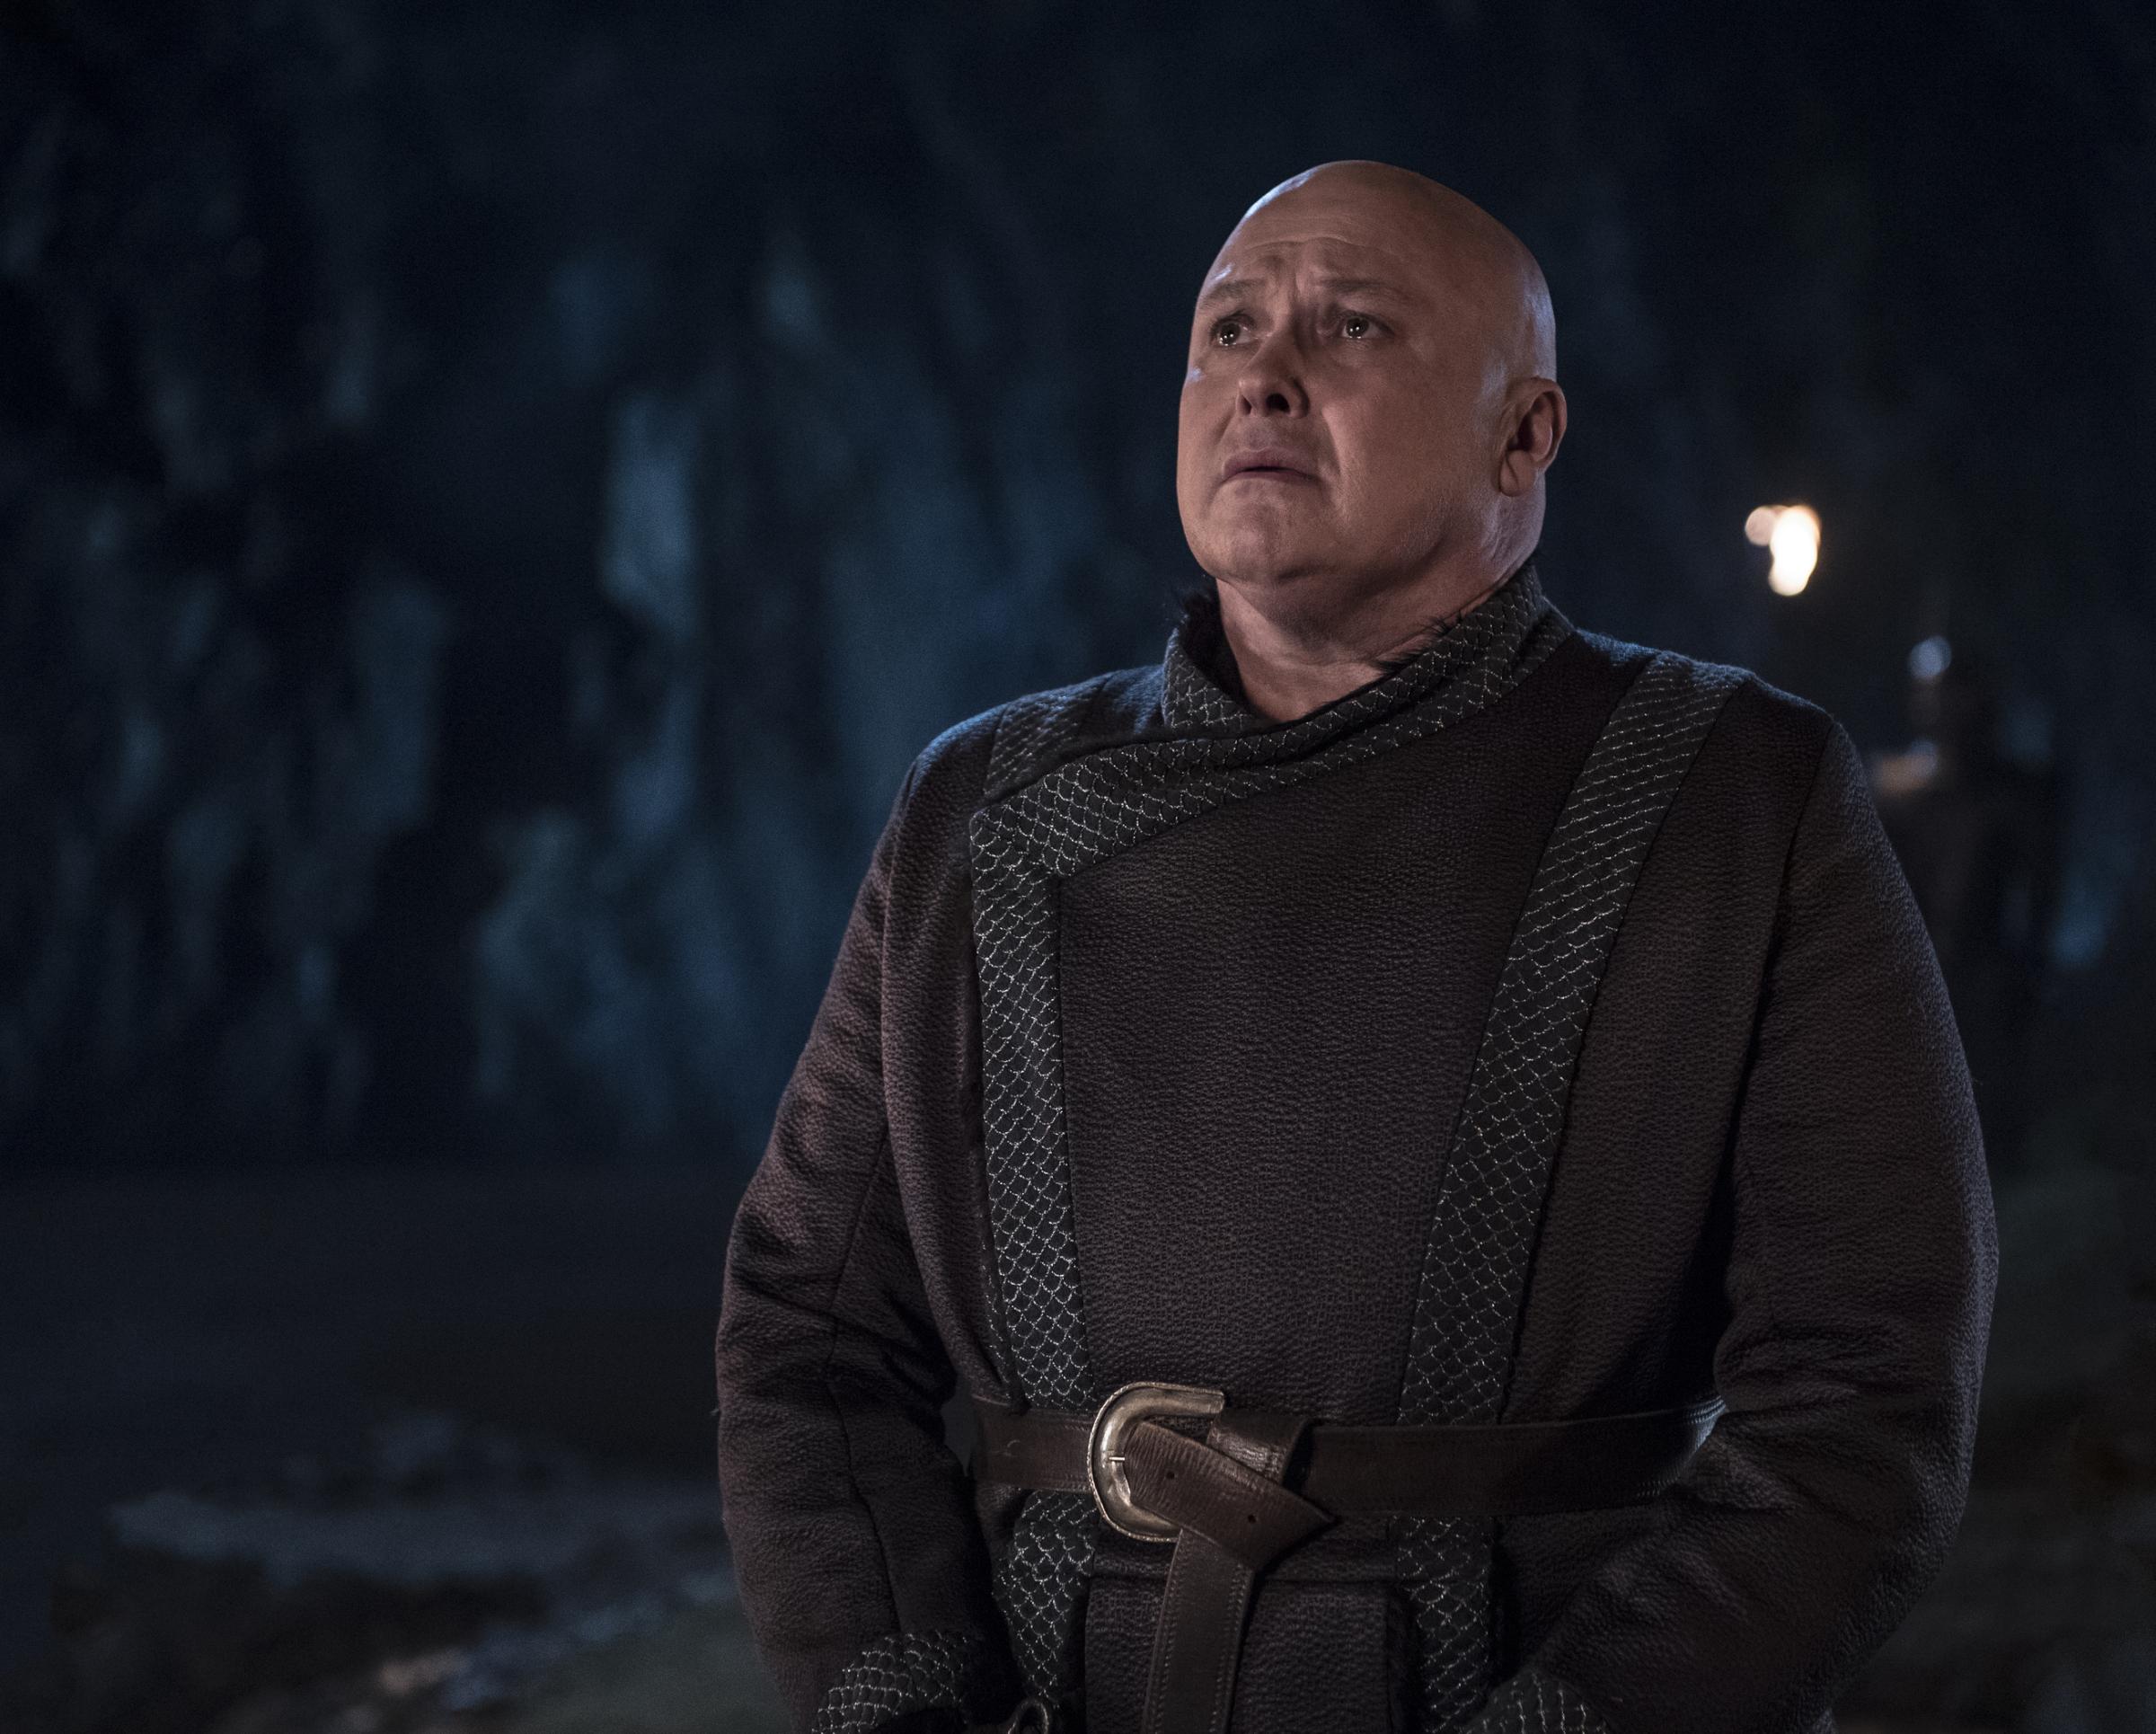 Varys memes flooded Twitter after he appears before Dany in Game of Thrones season 8 episode 5